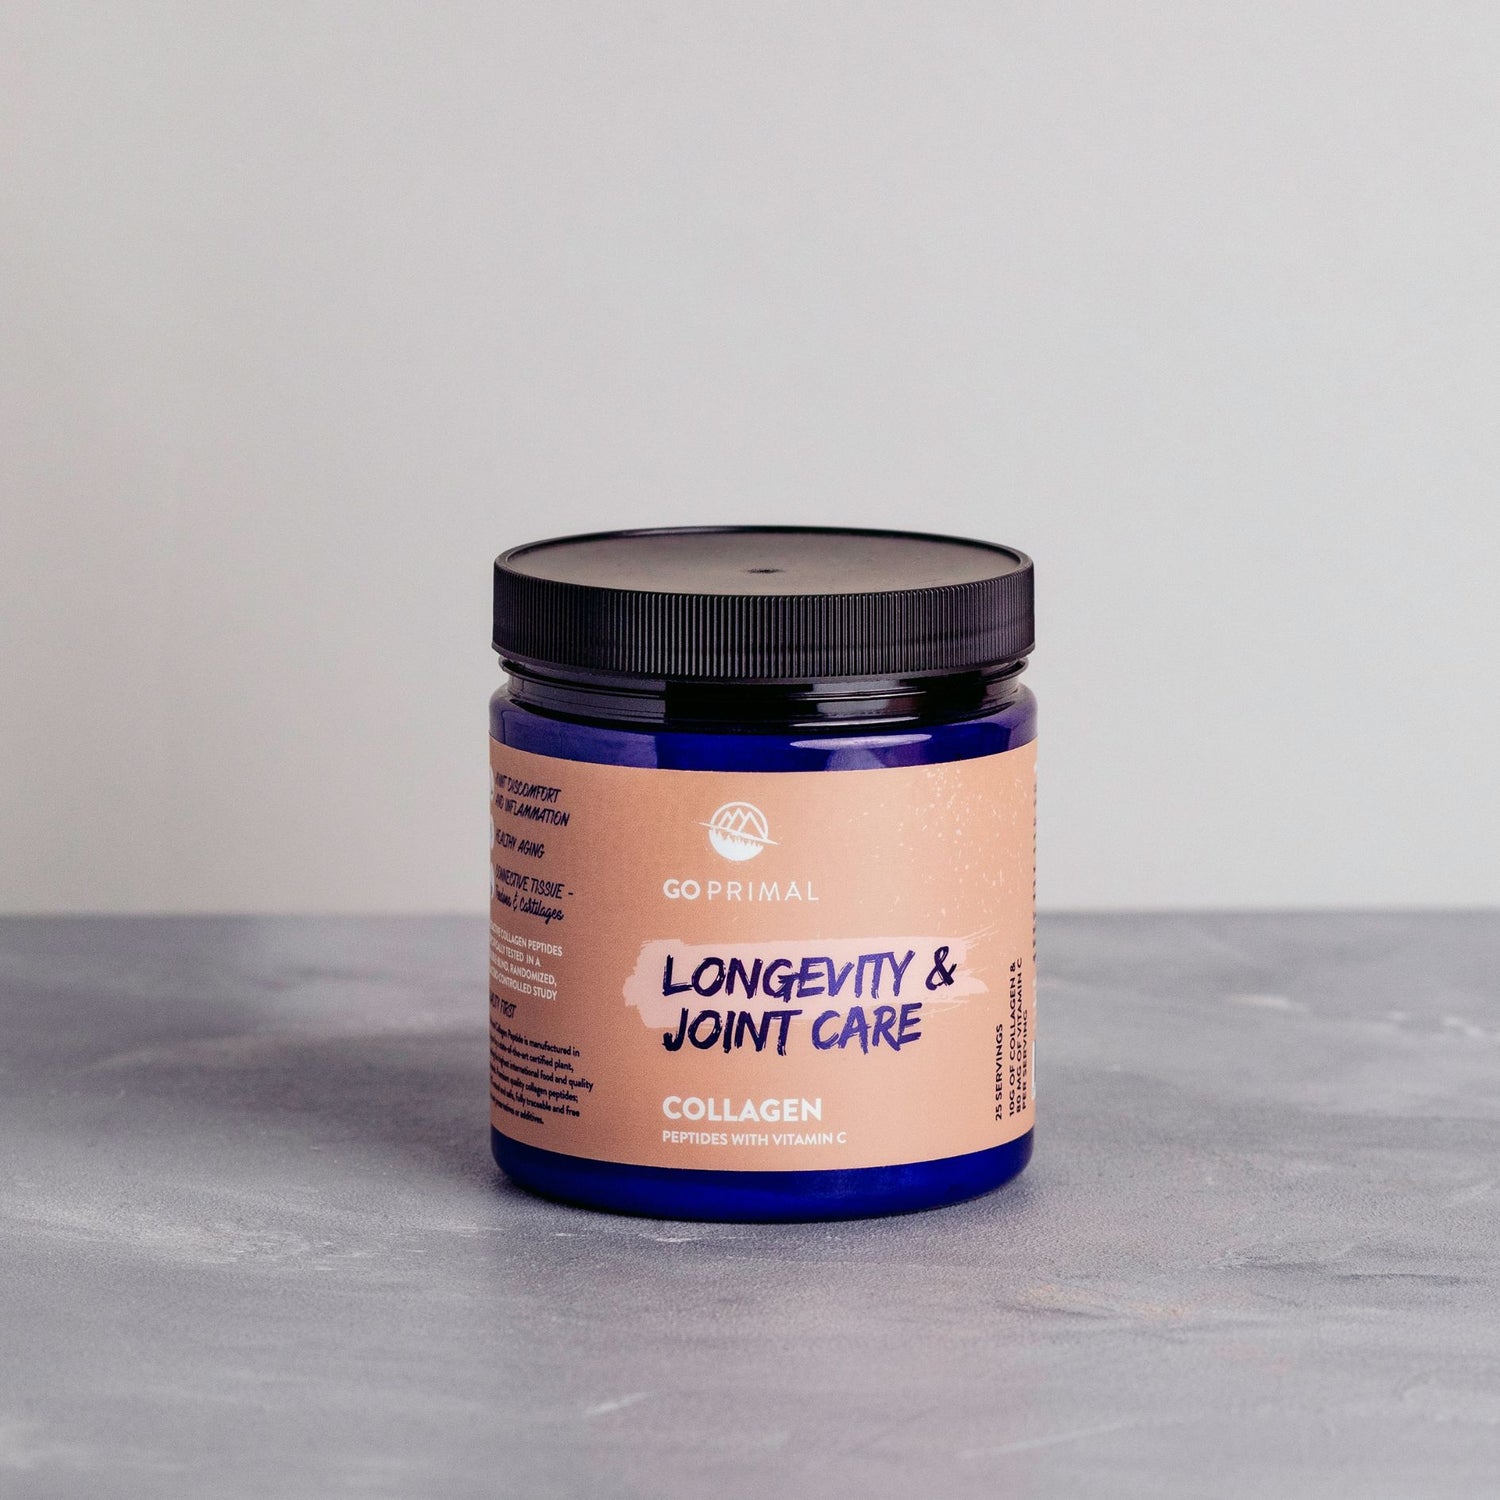 Longevity & Joints - Collagen Peptides with Vitamin C